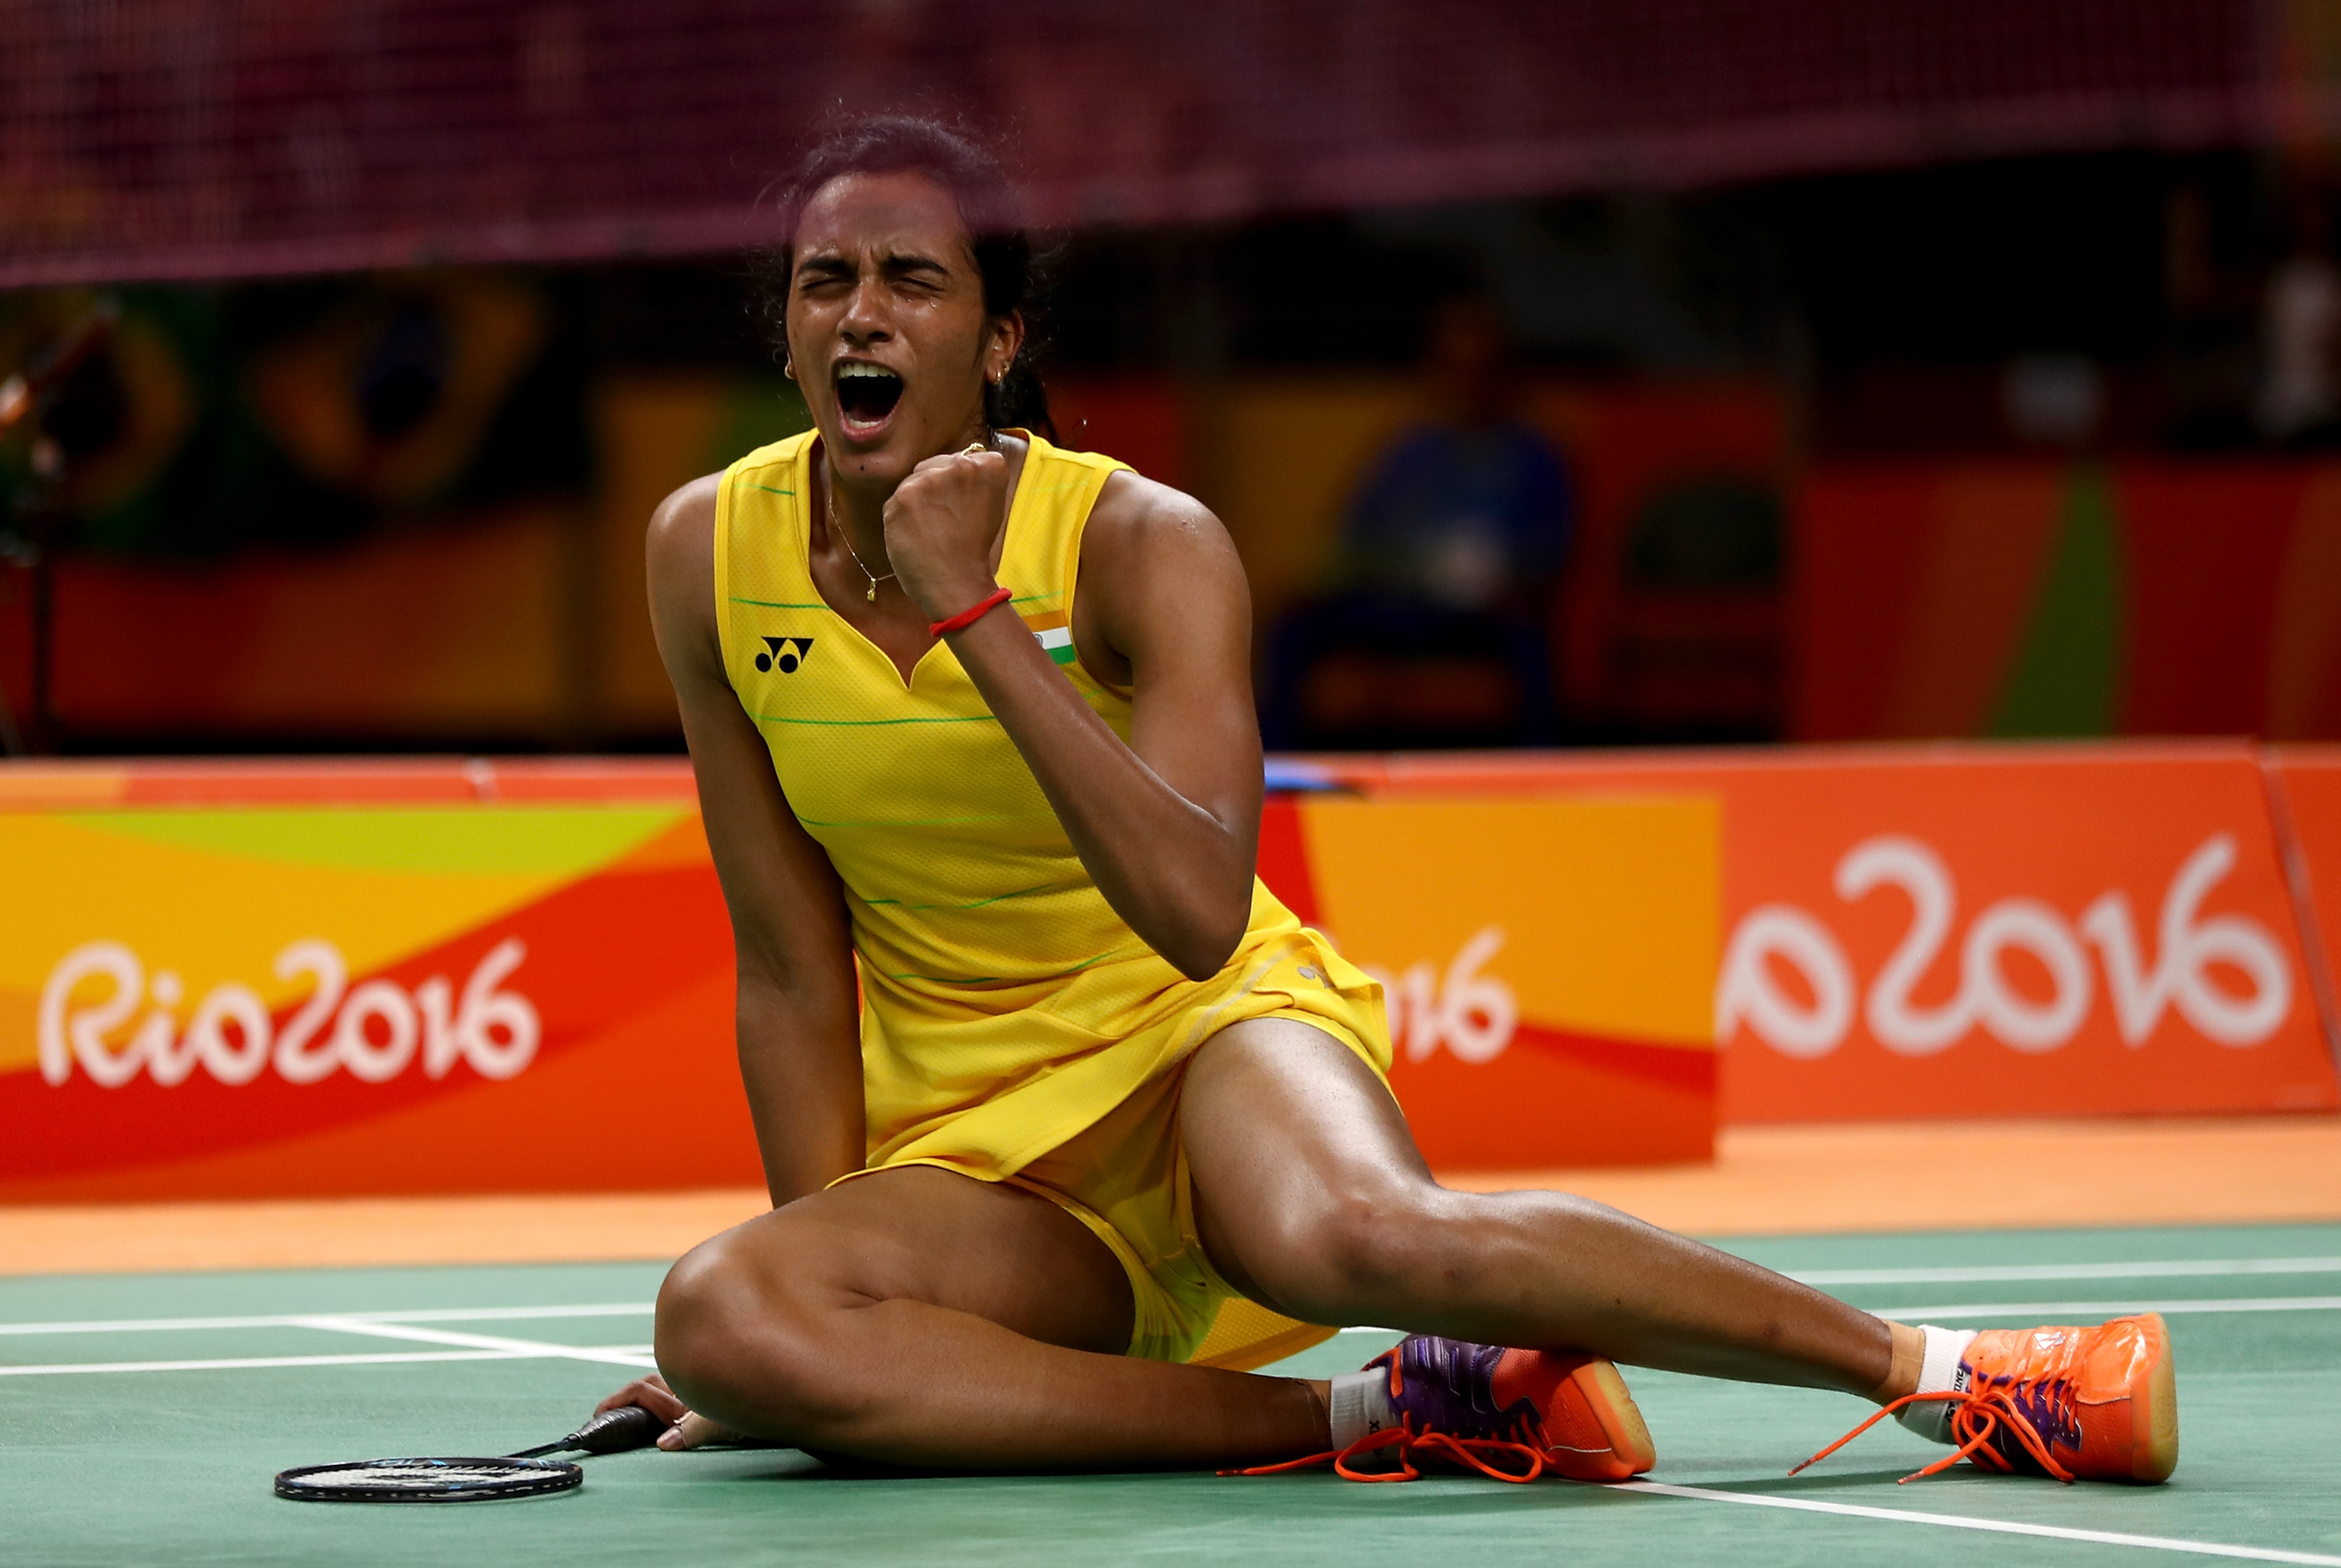 PV Sindhu provides blinding ray of hope in India's bleak Olympics ; defeats World No. 2 to enter semis